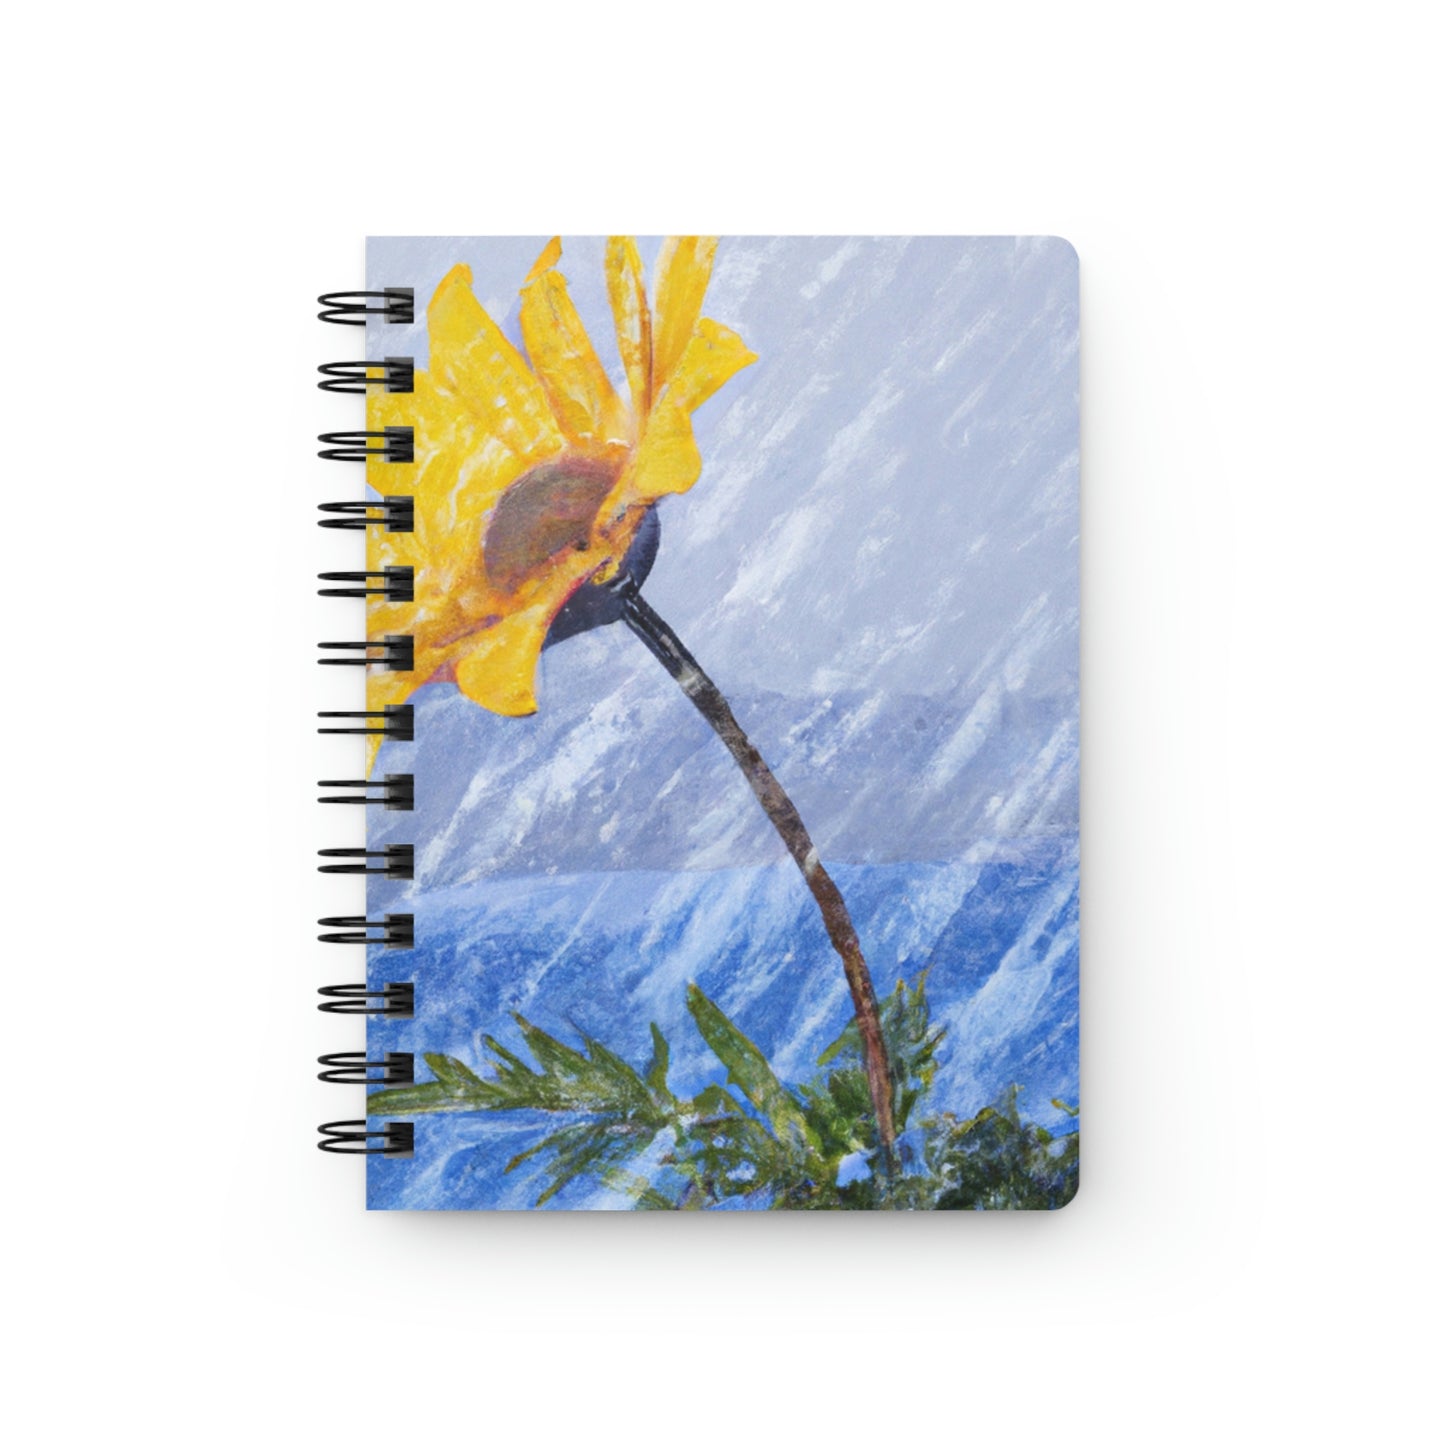 "A Burst of Color in the Glistening White: The Miracle of a Flower Blooms in a Snowstorm" - The Alien Spiral Bound Journal